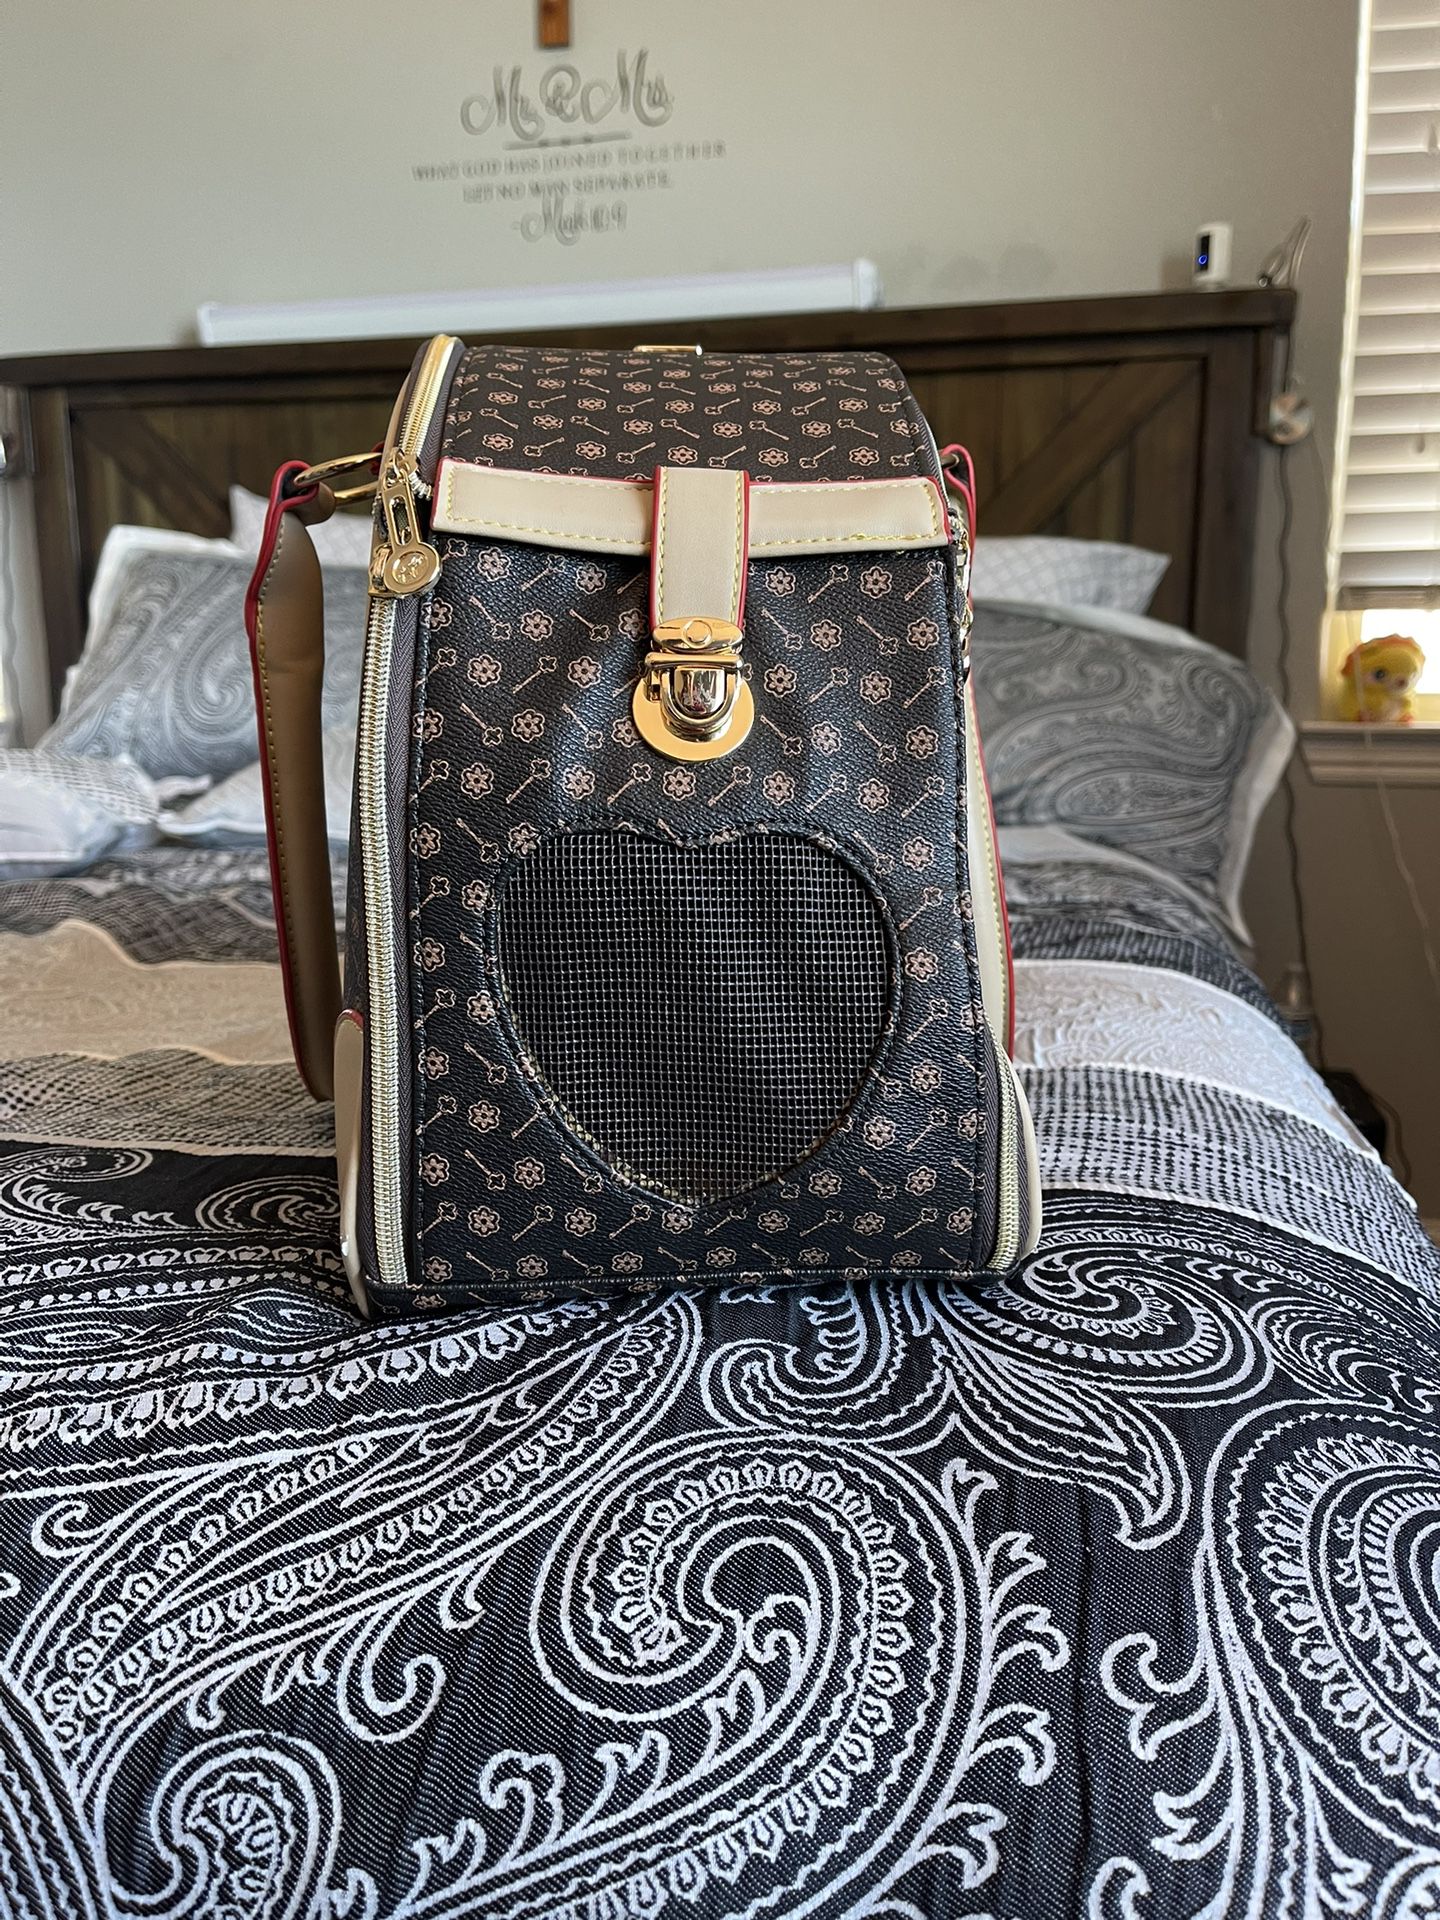 Small Pet Carrier for Sale in Manteca, CA - OfferUp